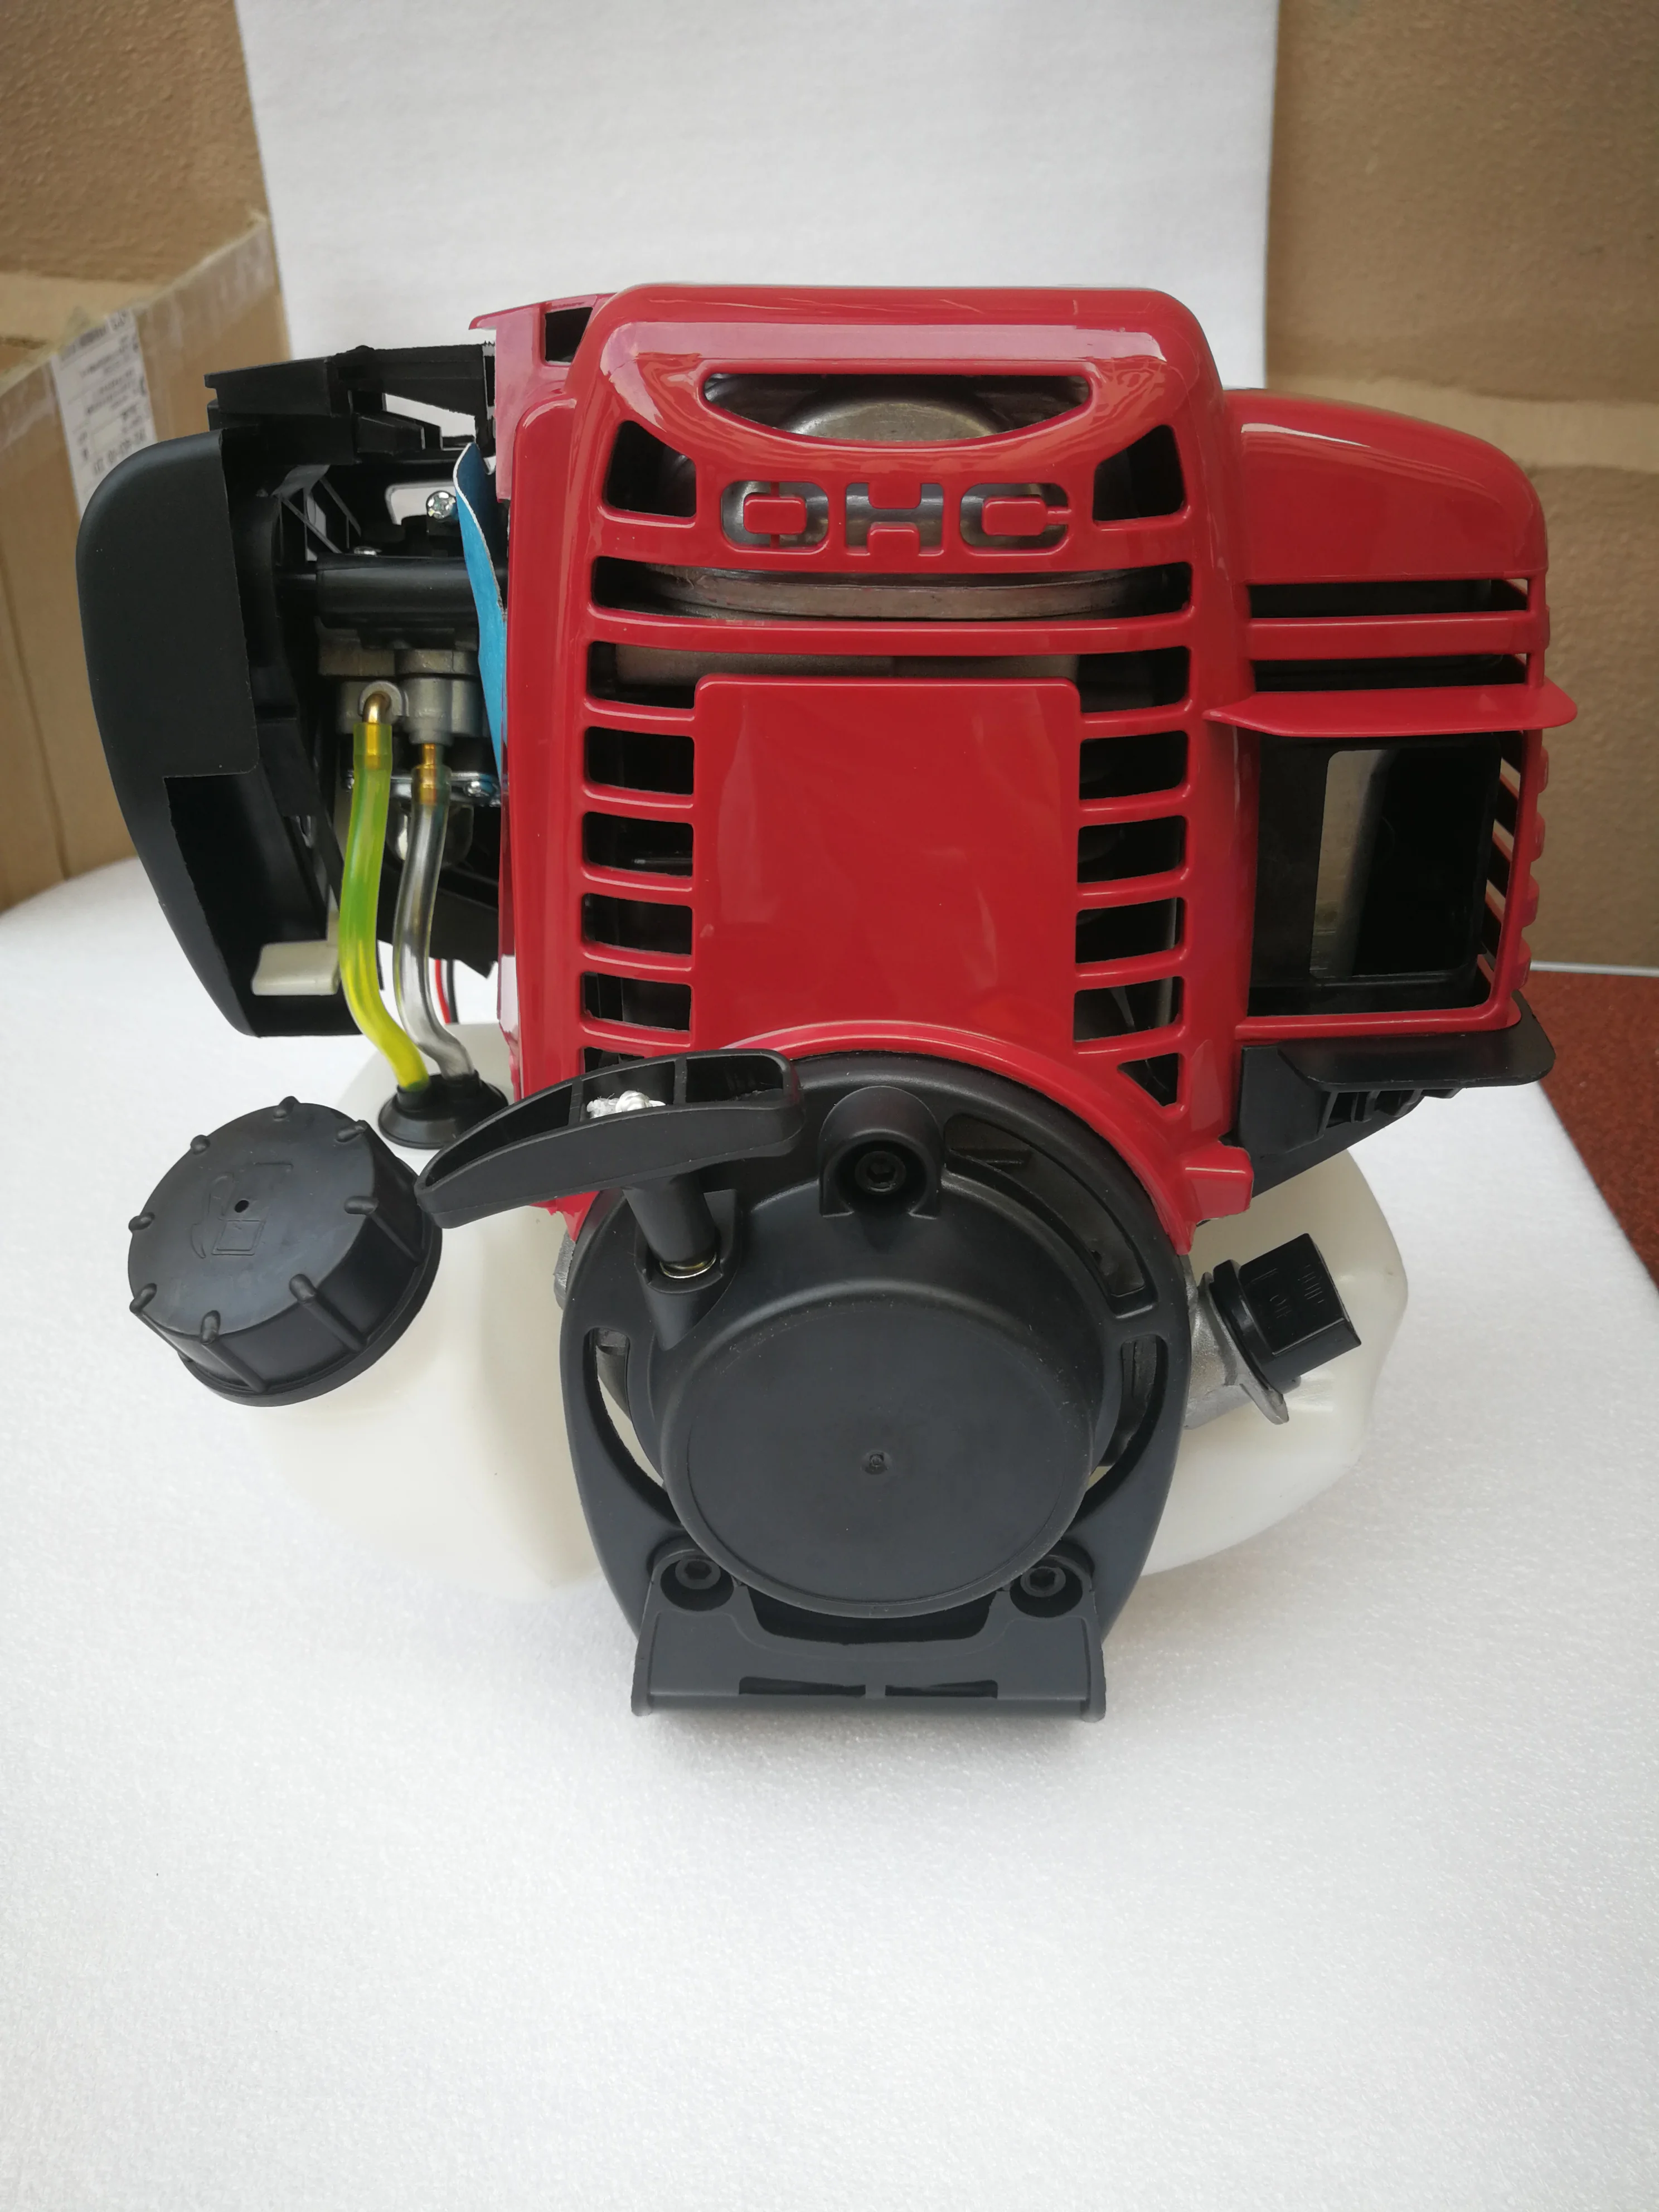 

35cc New Aftermarket 4 T Stroke Engine Petrol Motor Gasoline Power For Brush Cutter Grass Trimmer Gx35 35.8cc